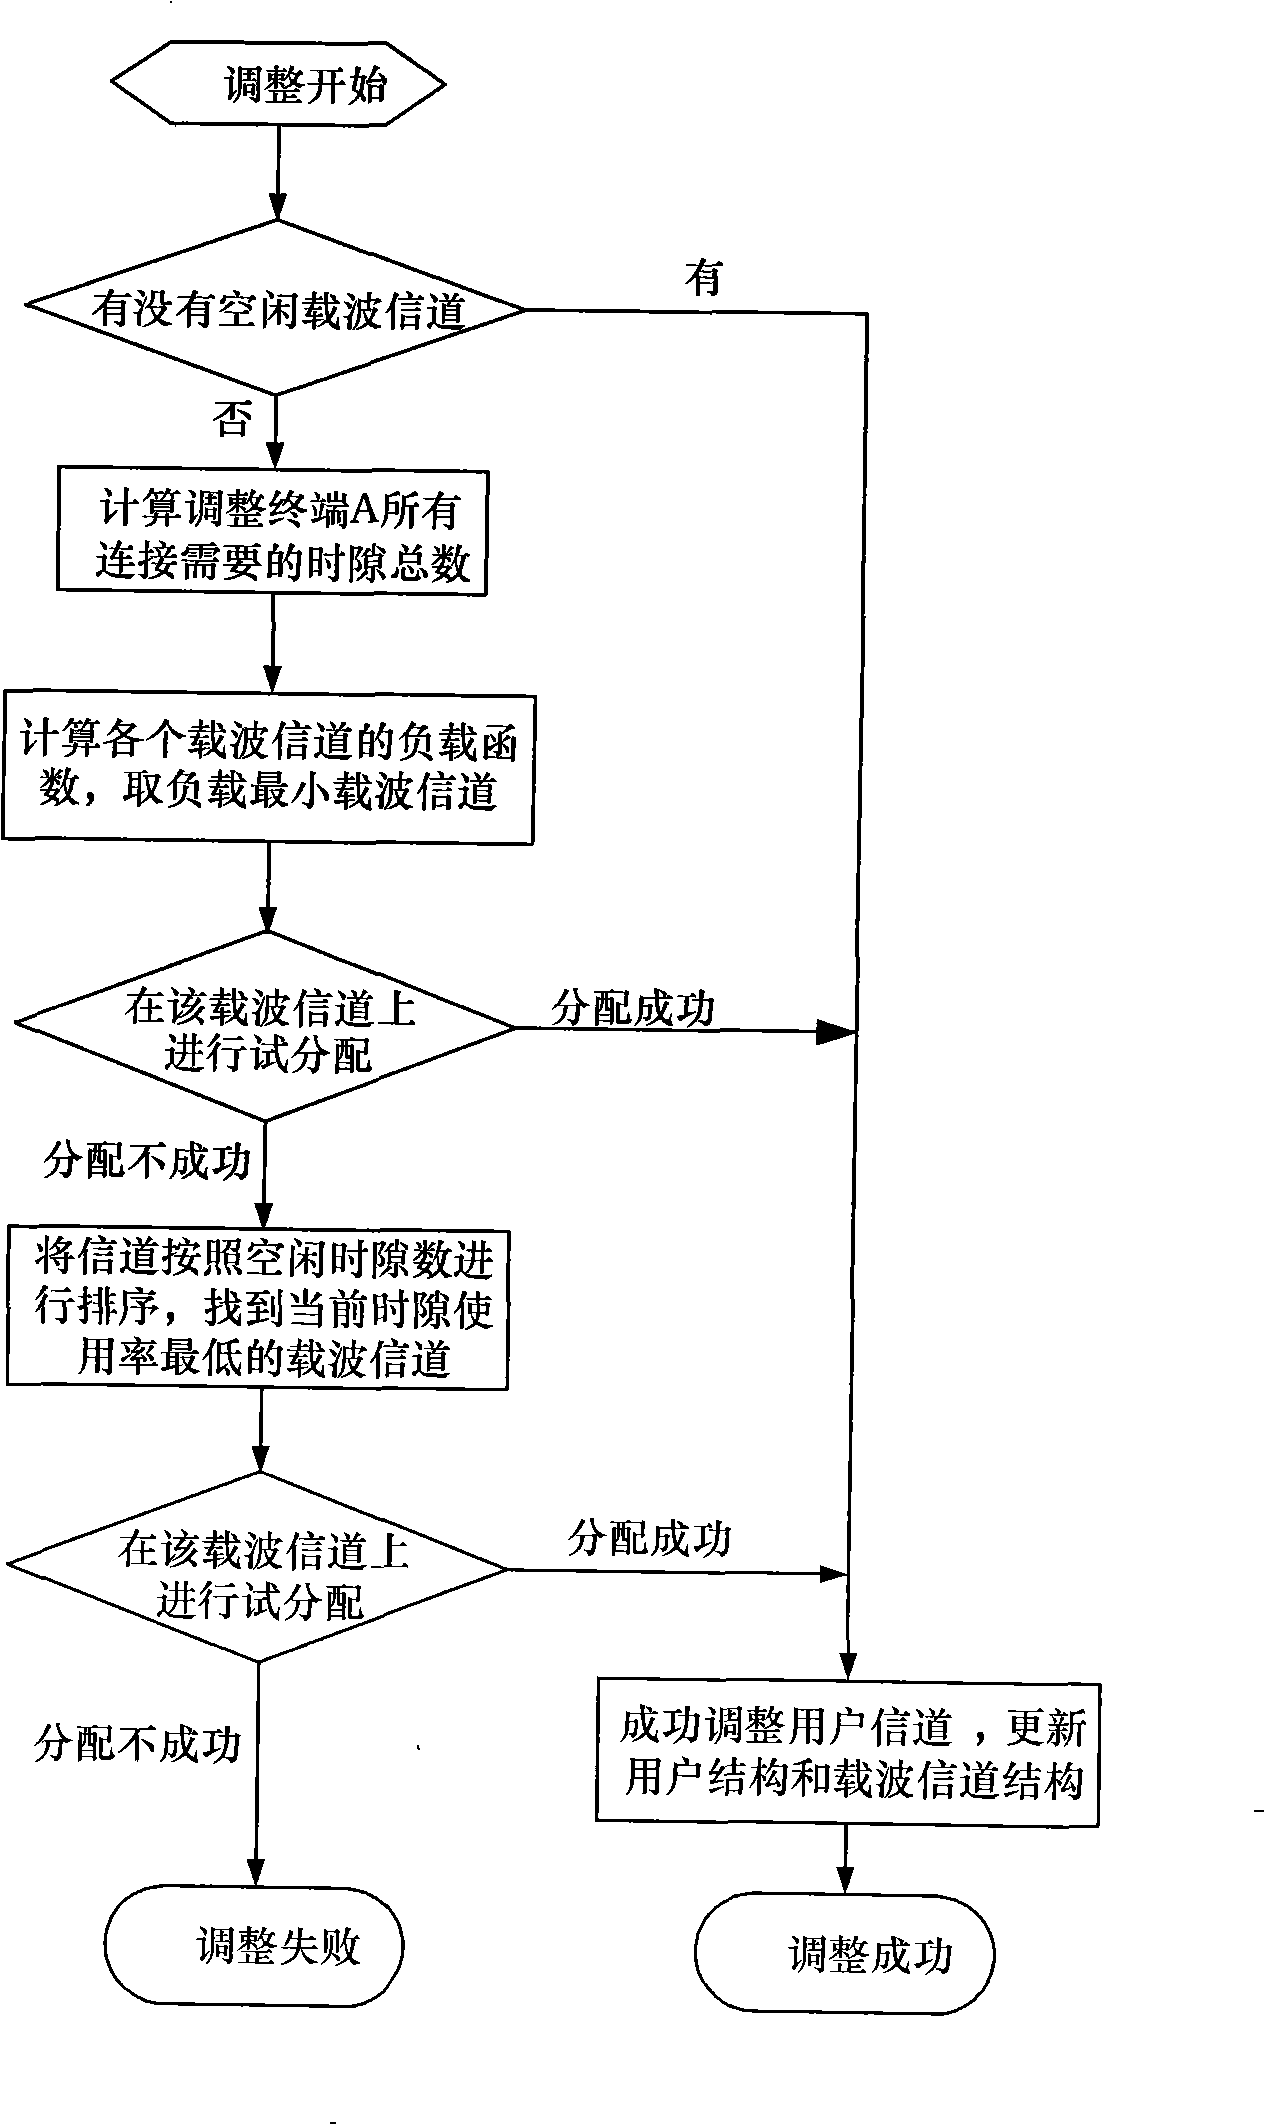 Carrier channel selection method in MF-TDMA satellite system